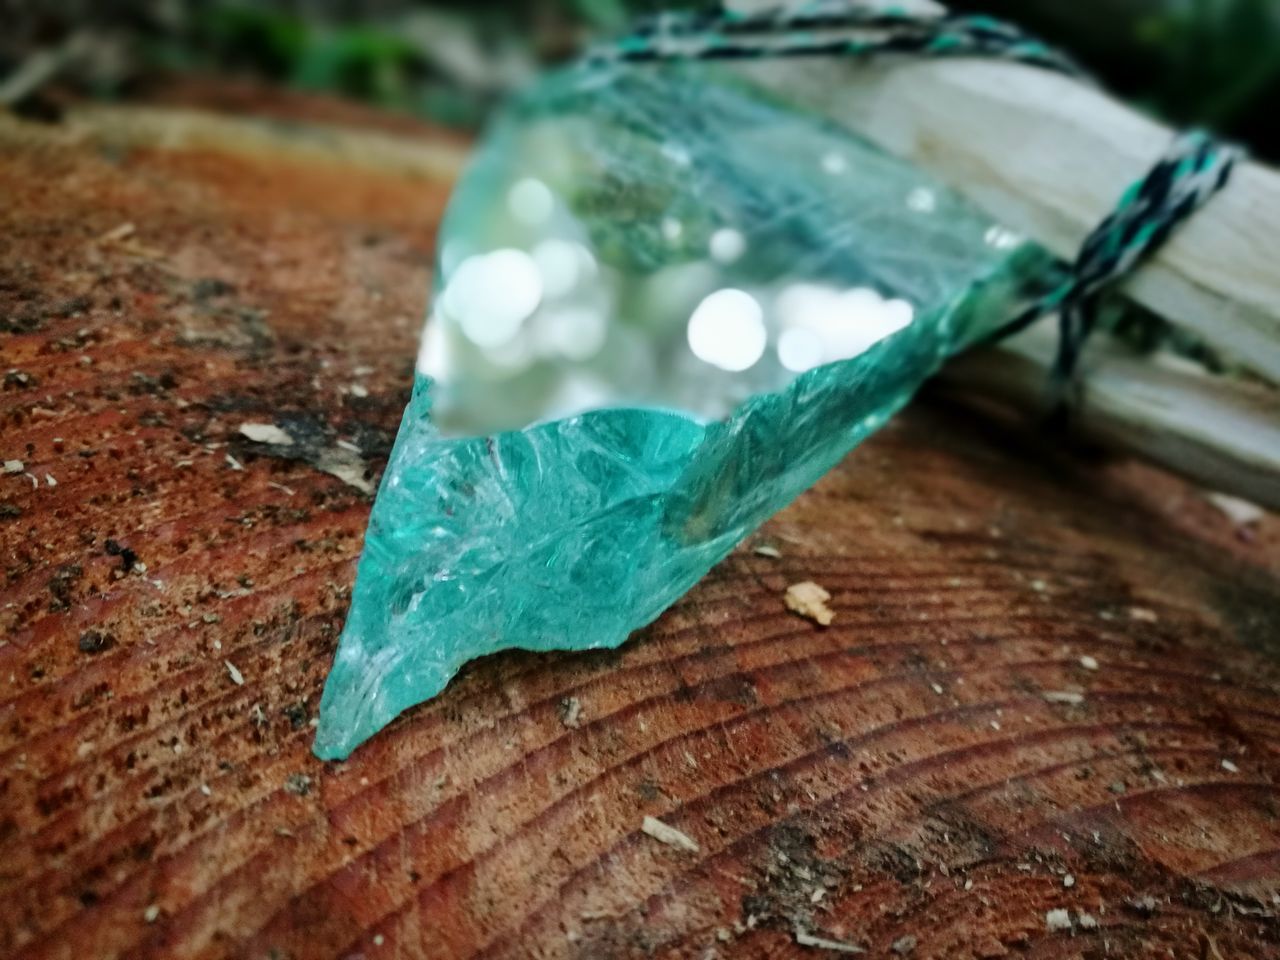 close-up, no people, focus on foreground, still life, nature, day, table, green color, wood - material, plant part, outdoors, leaf, selective focus, blue, water, jewelry, plastic, high angle view, transparent